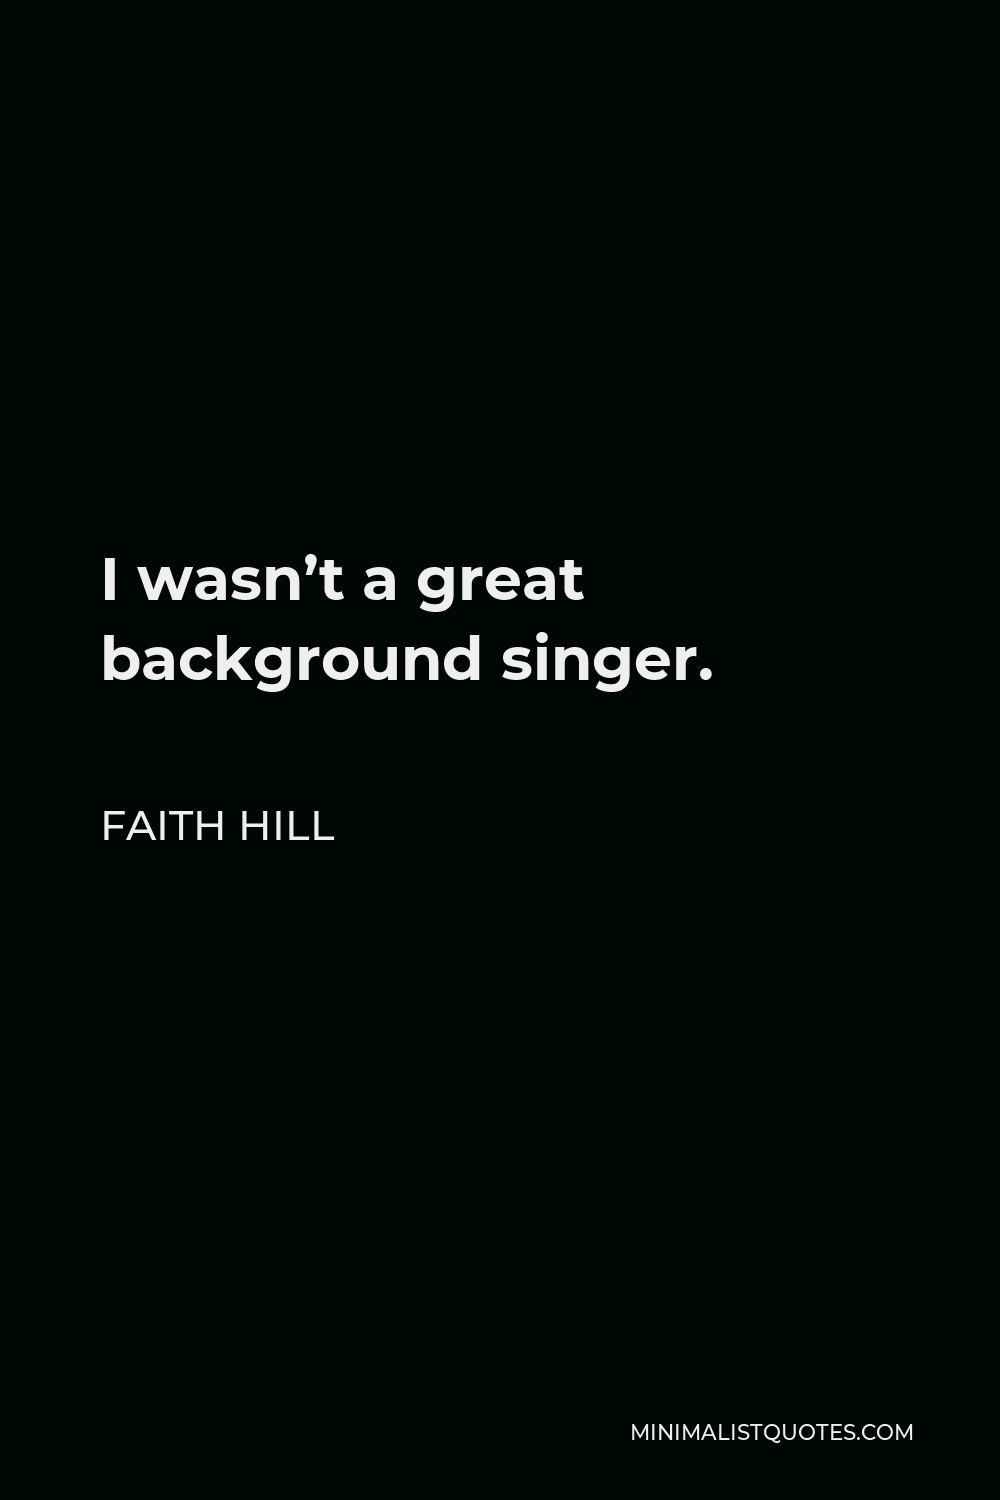 Faith Hill Quote - I wasn’t a great background singer.